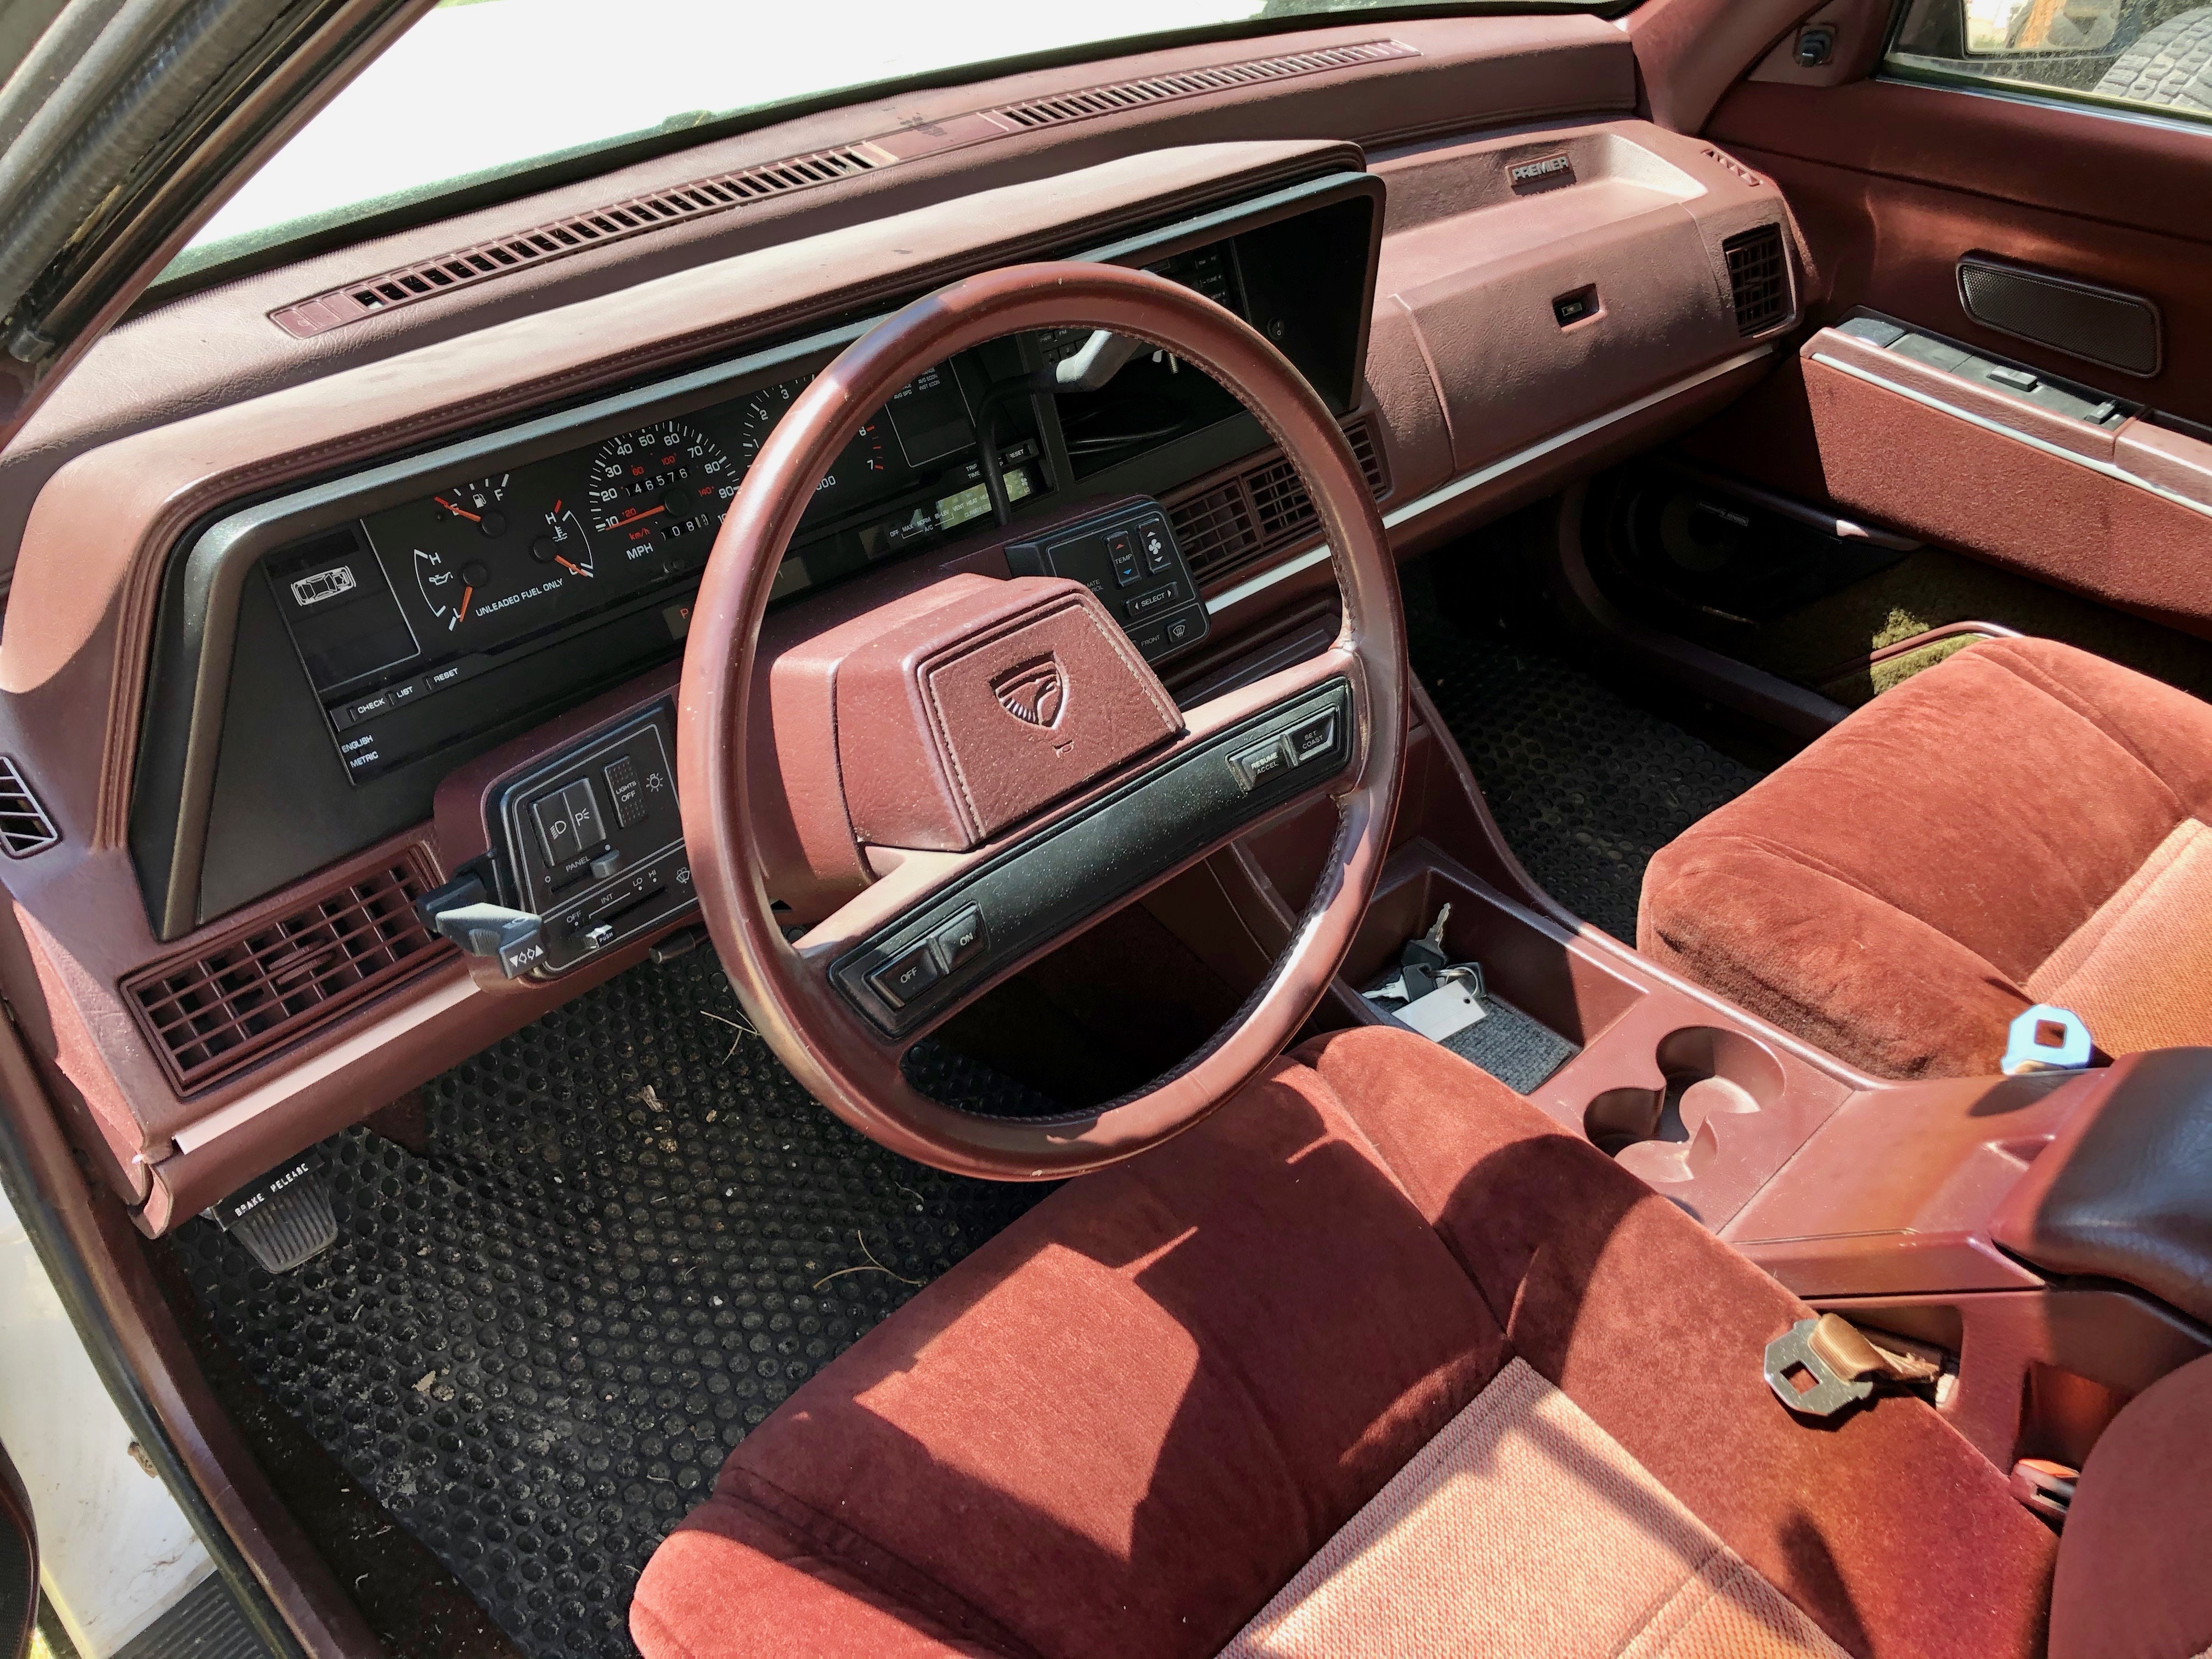 File:1989 Eagle Premier in white with burgundy upholstery at Rambler Ranch  3of3.jpg - Wikimedia Commons